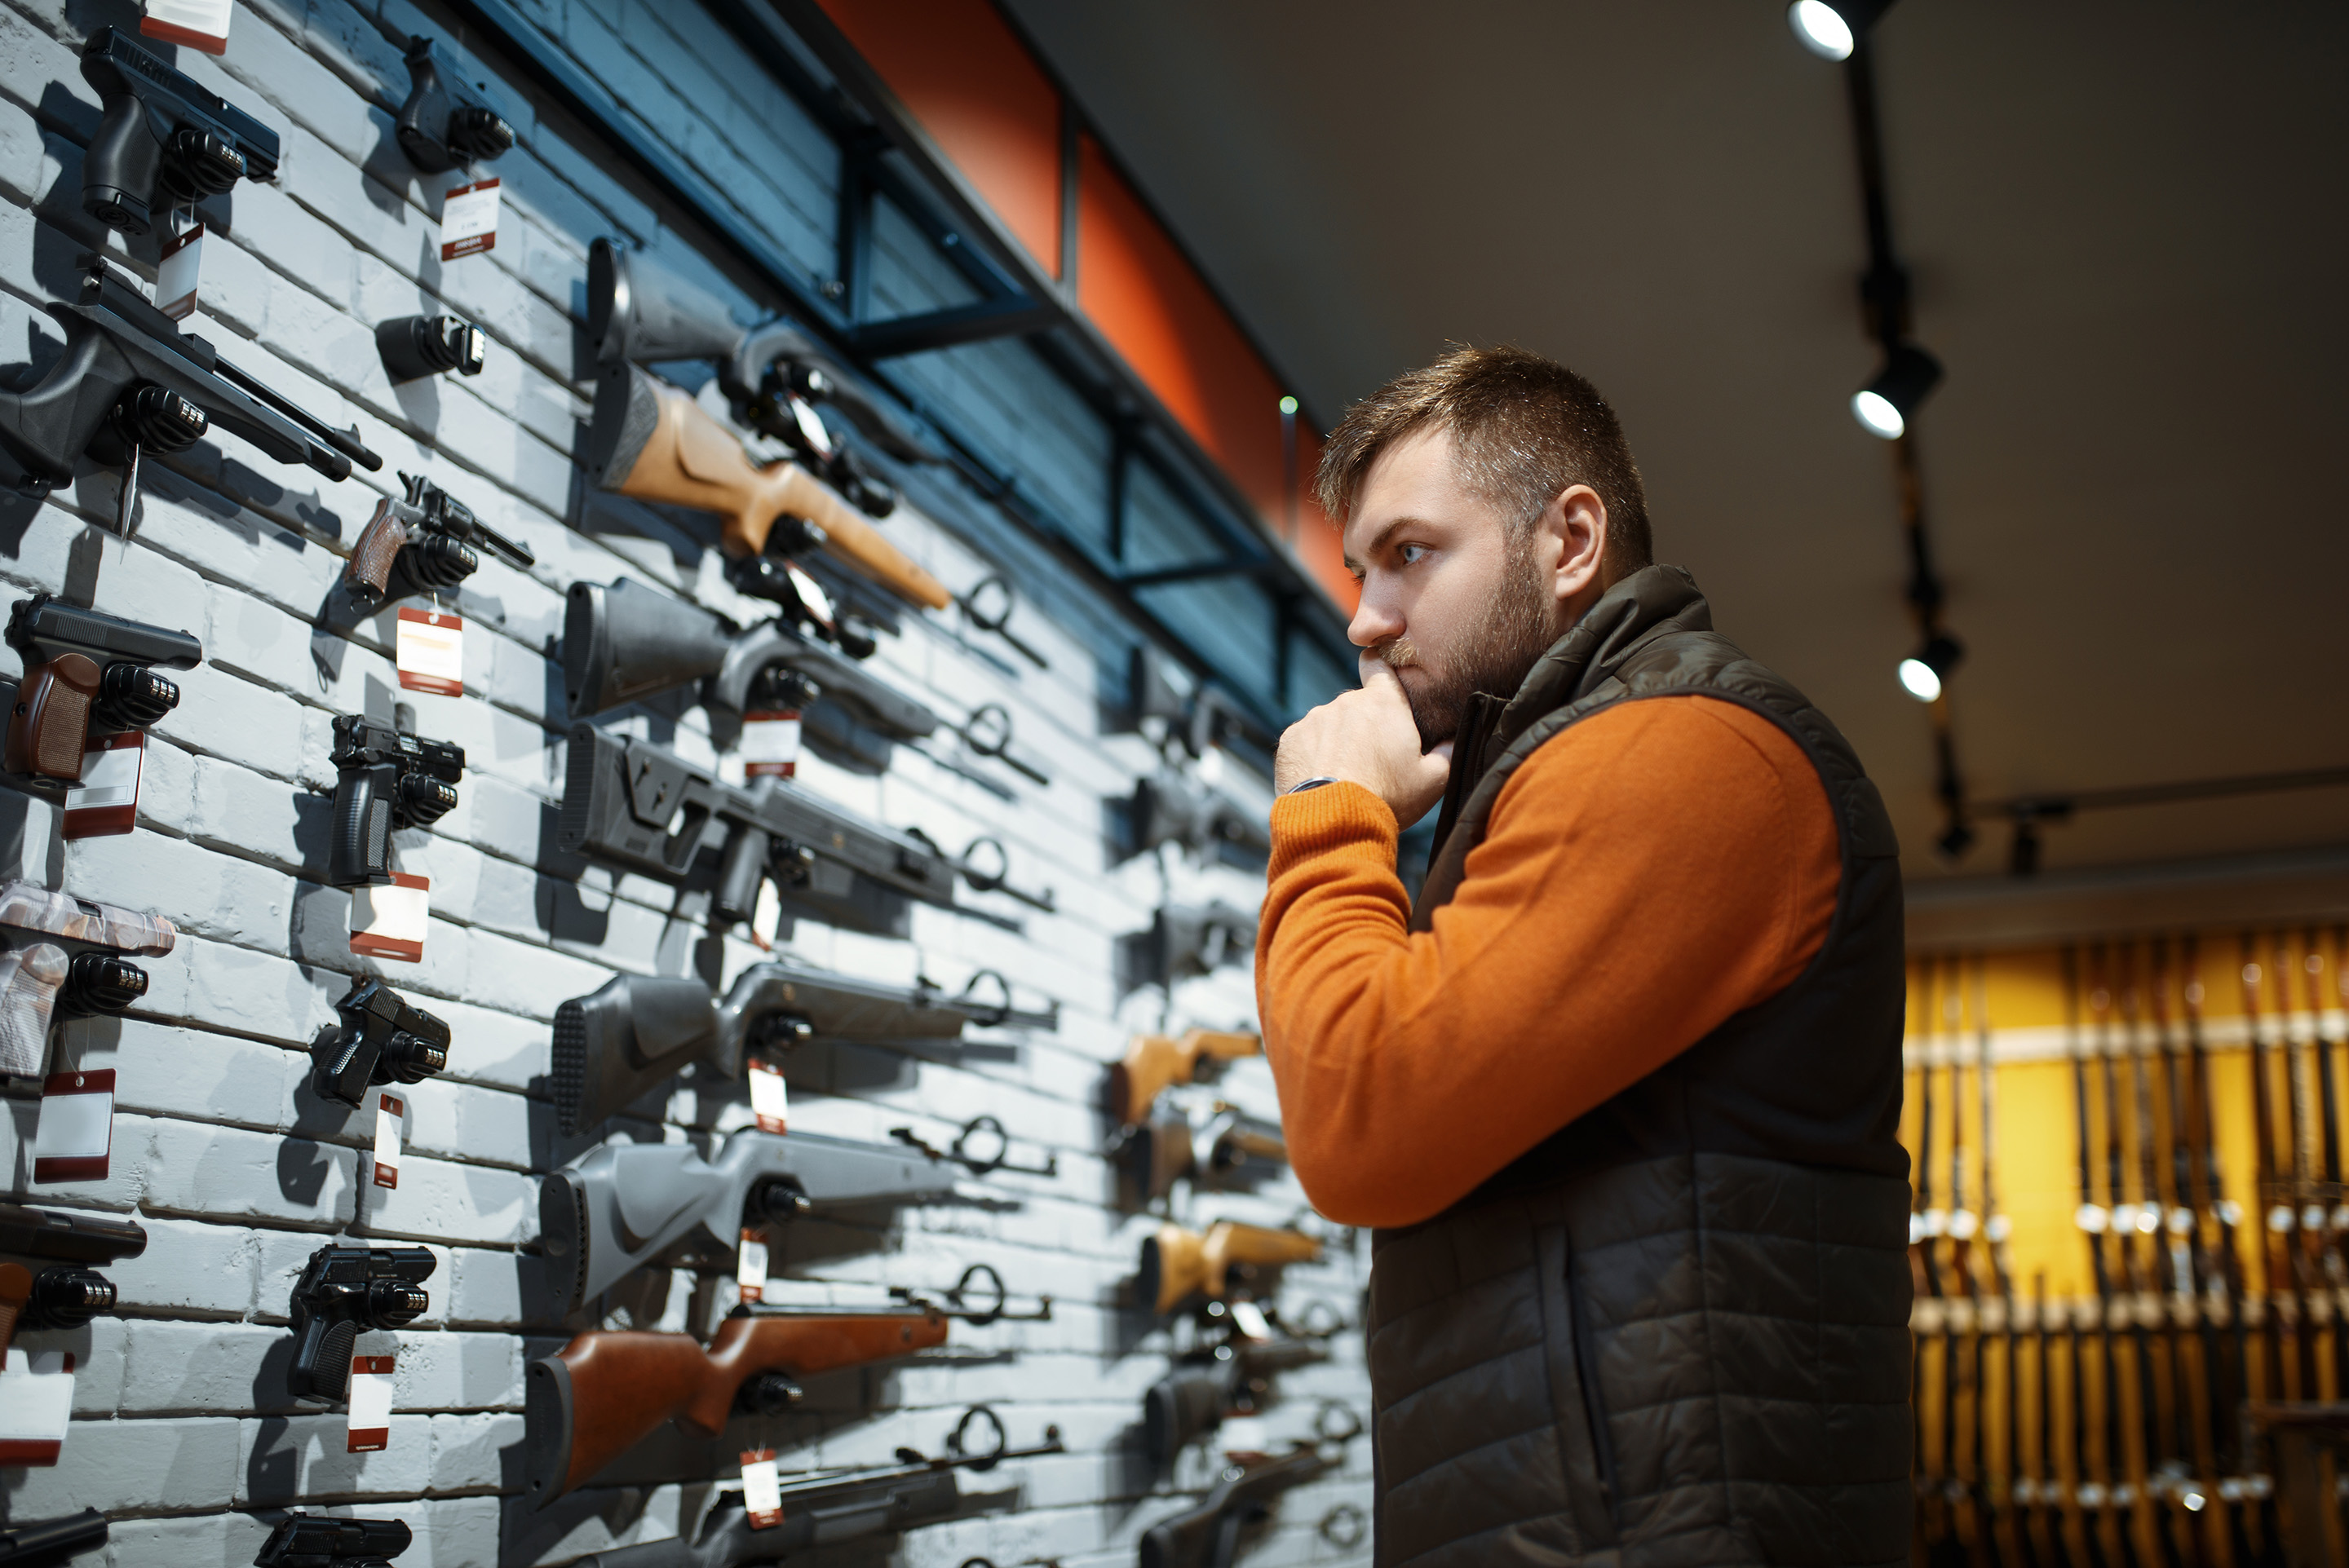 Pandemic Fears Driving Firearm Purchases